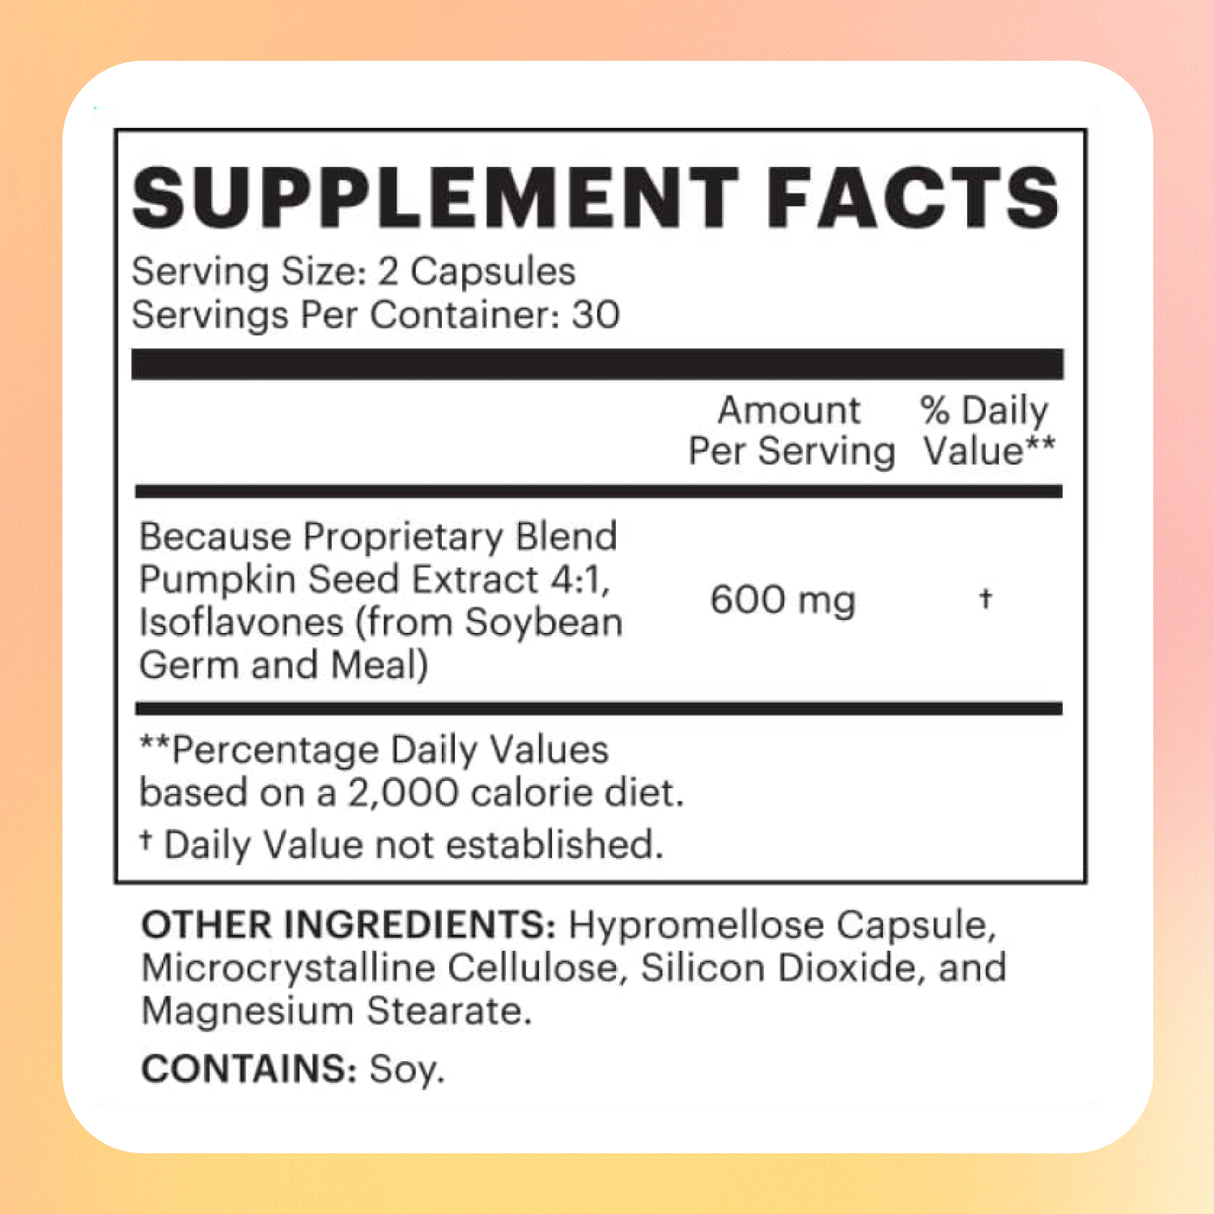 Bladder Control Supplement facts table and ingredients description.